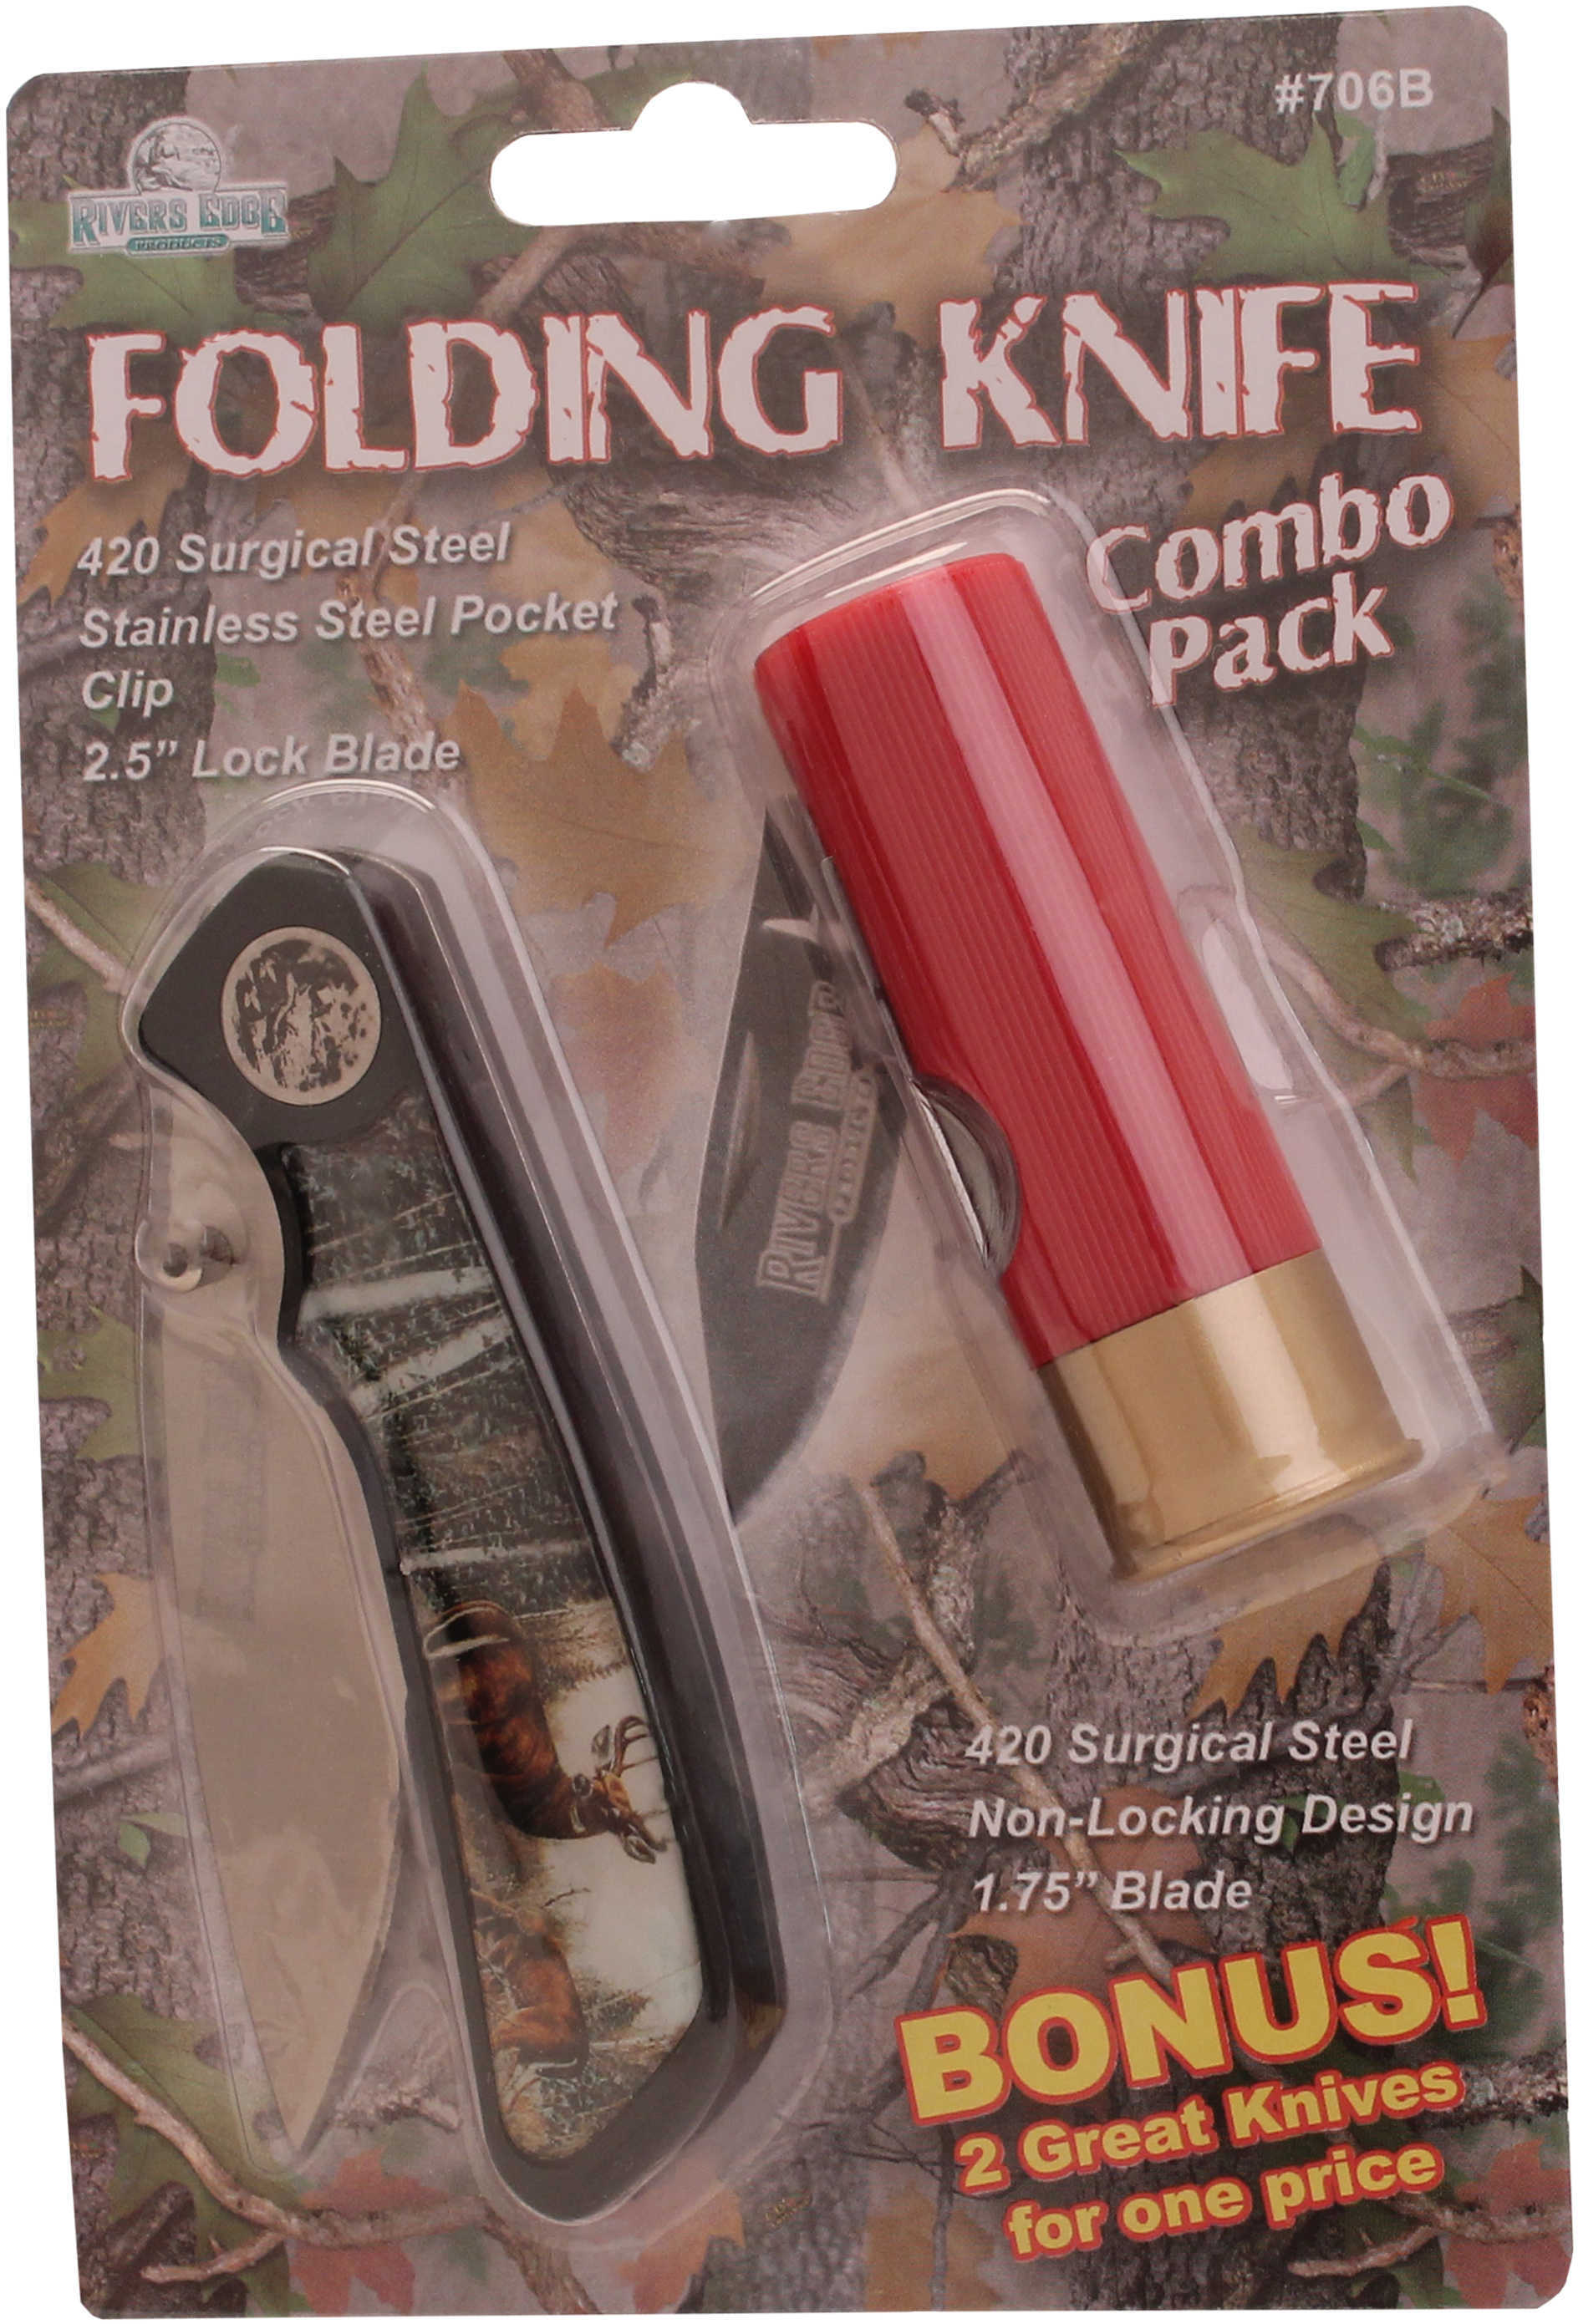 Rivers Edge Products Knife Combo Pack(Per 12) 706B